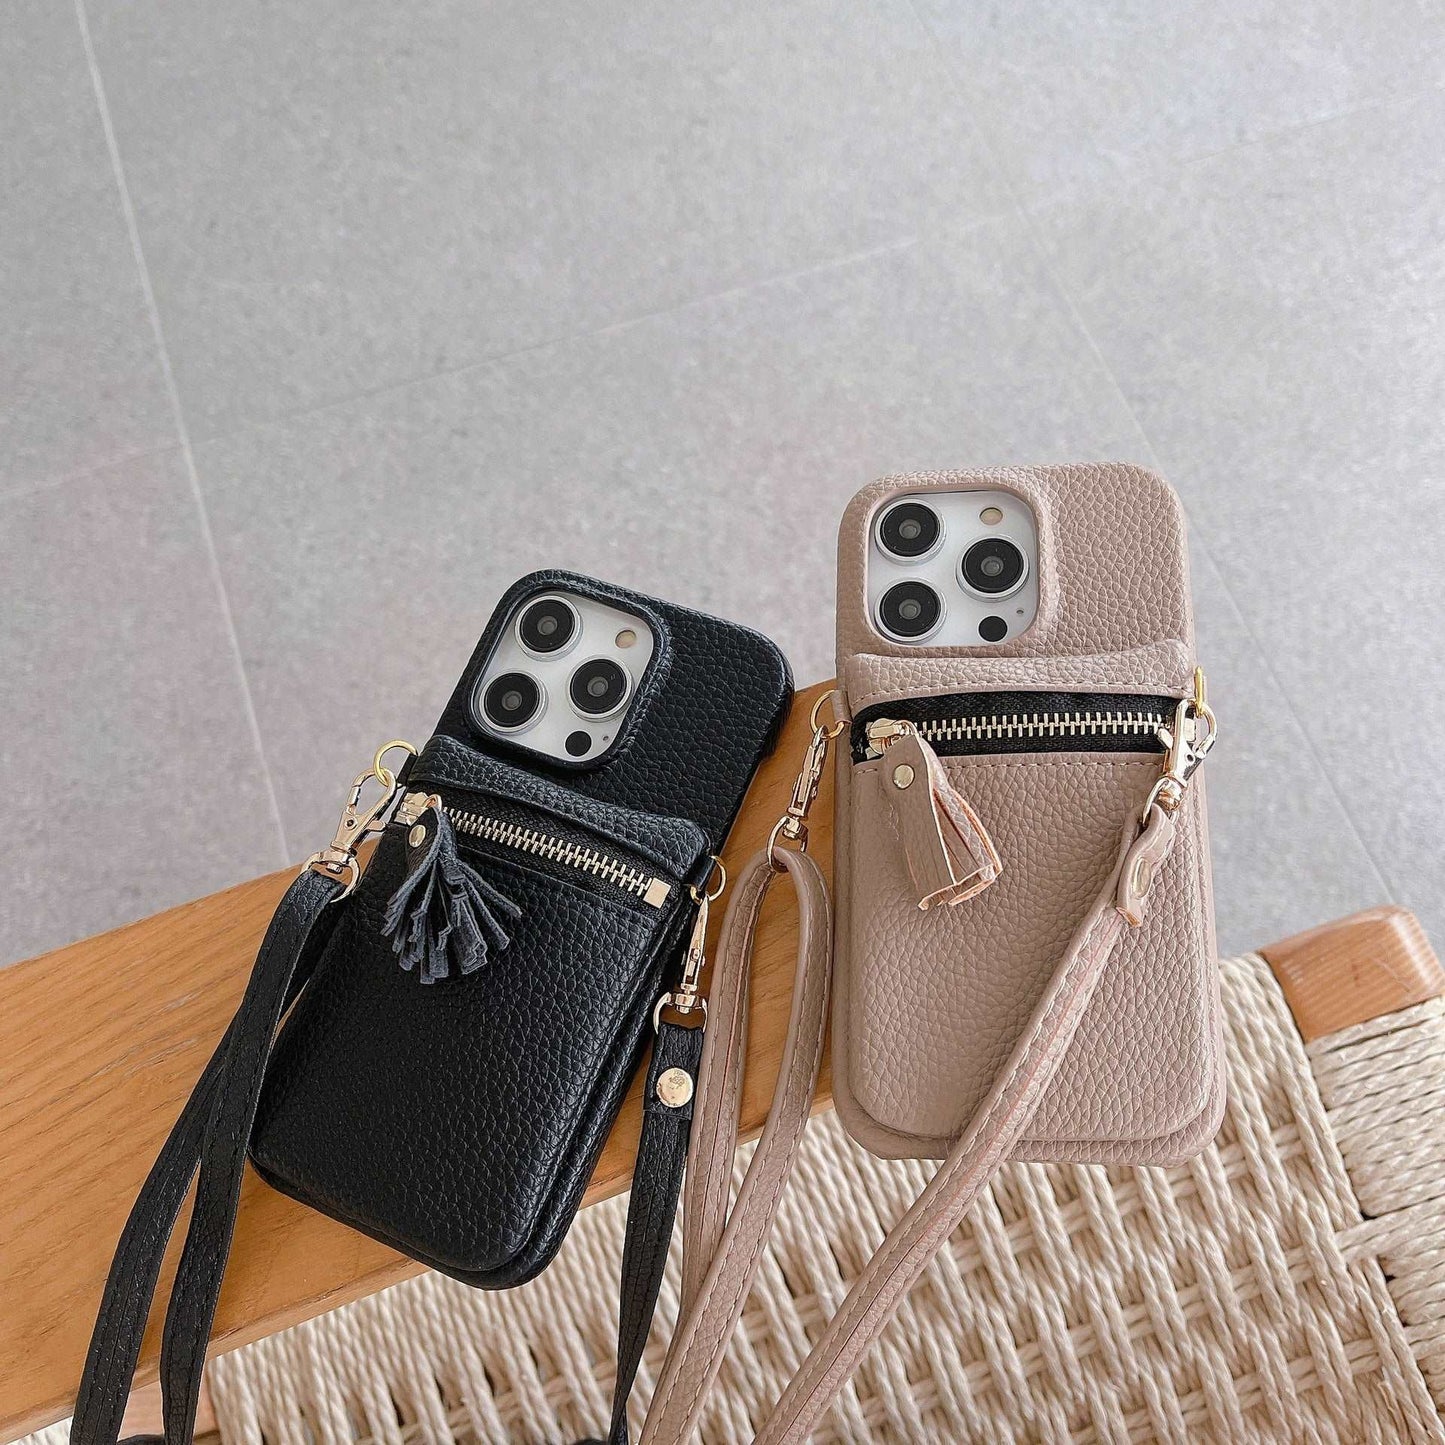 Max Zipper Pocket Purse for Credit Card Holder Phone Cases - M&H FashionMax Zipper Pocket Purse for Credit Card Holder Phone CasesiPhoneM&H FashionM&H Fashion10:351785#iPhone 14;14:771#WhiteiPhone 14WhiteCredit Card Holder Phone CasesM&H FashioniPhoneM&H FashionMax Zipper Pocket Purse for Credit Card Holder Phone Cases is the perfect accessory for your iPhone. This stylish and lightweight case features a dual layer design wMax Zipper Pocket Purse for Credit Card Holder Phone Cases